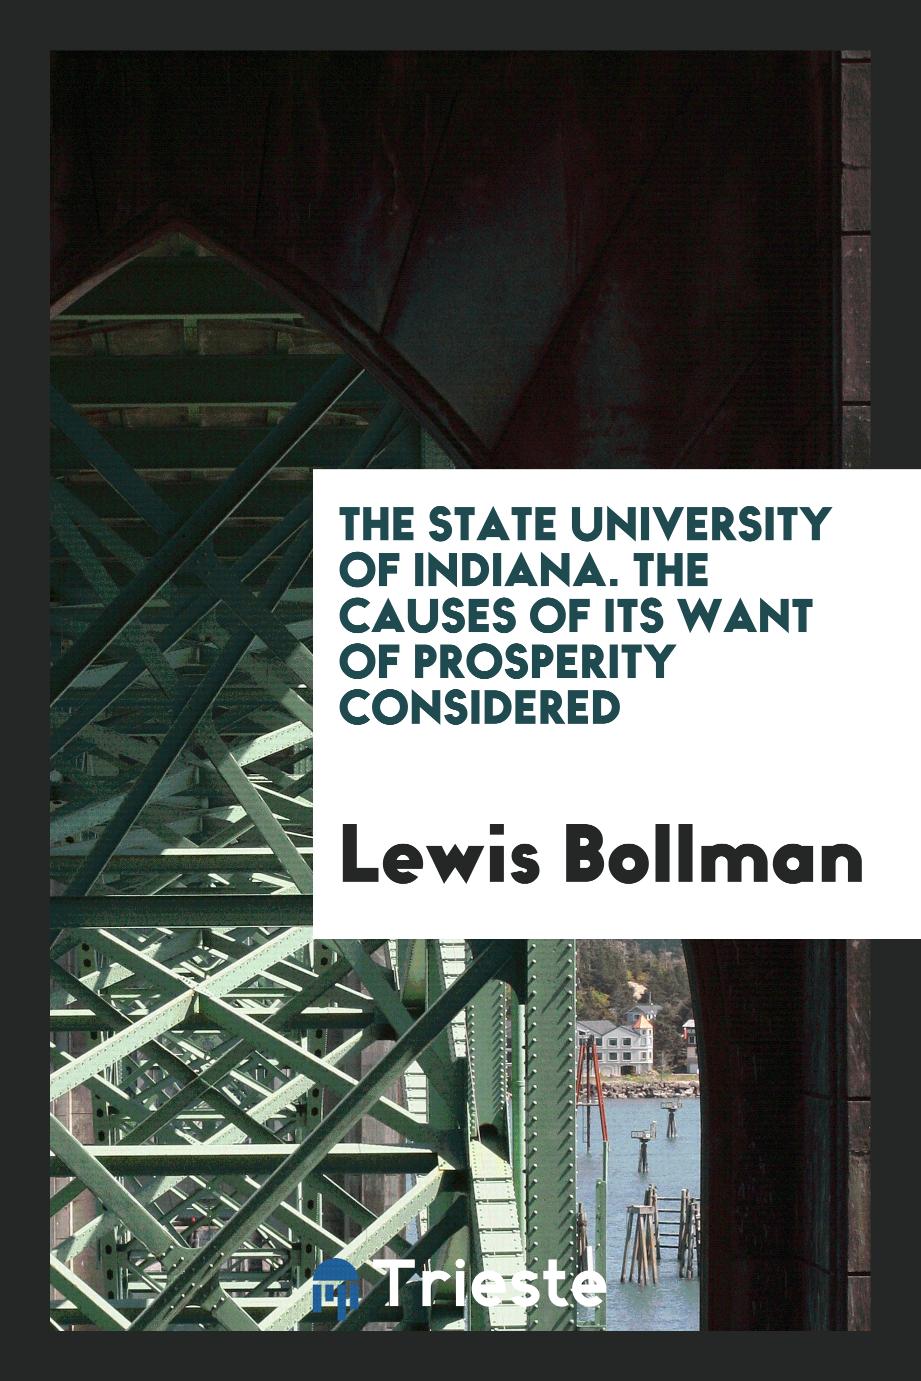 The state University of Indiana. The causes of its want of prosperity considered